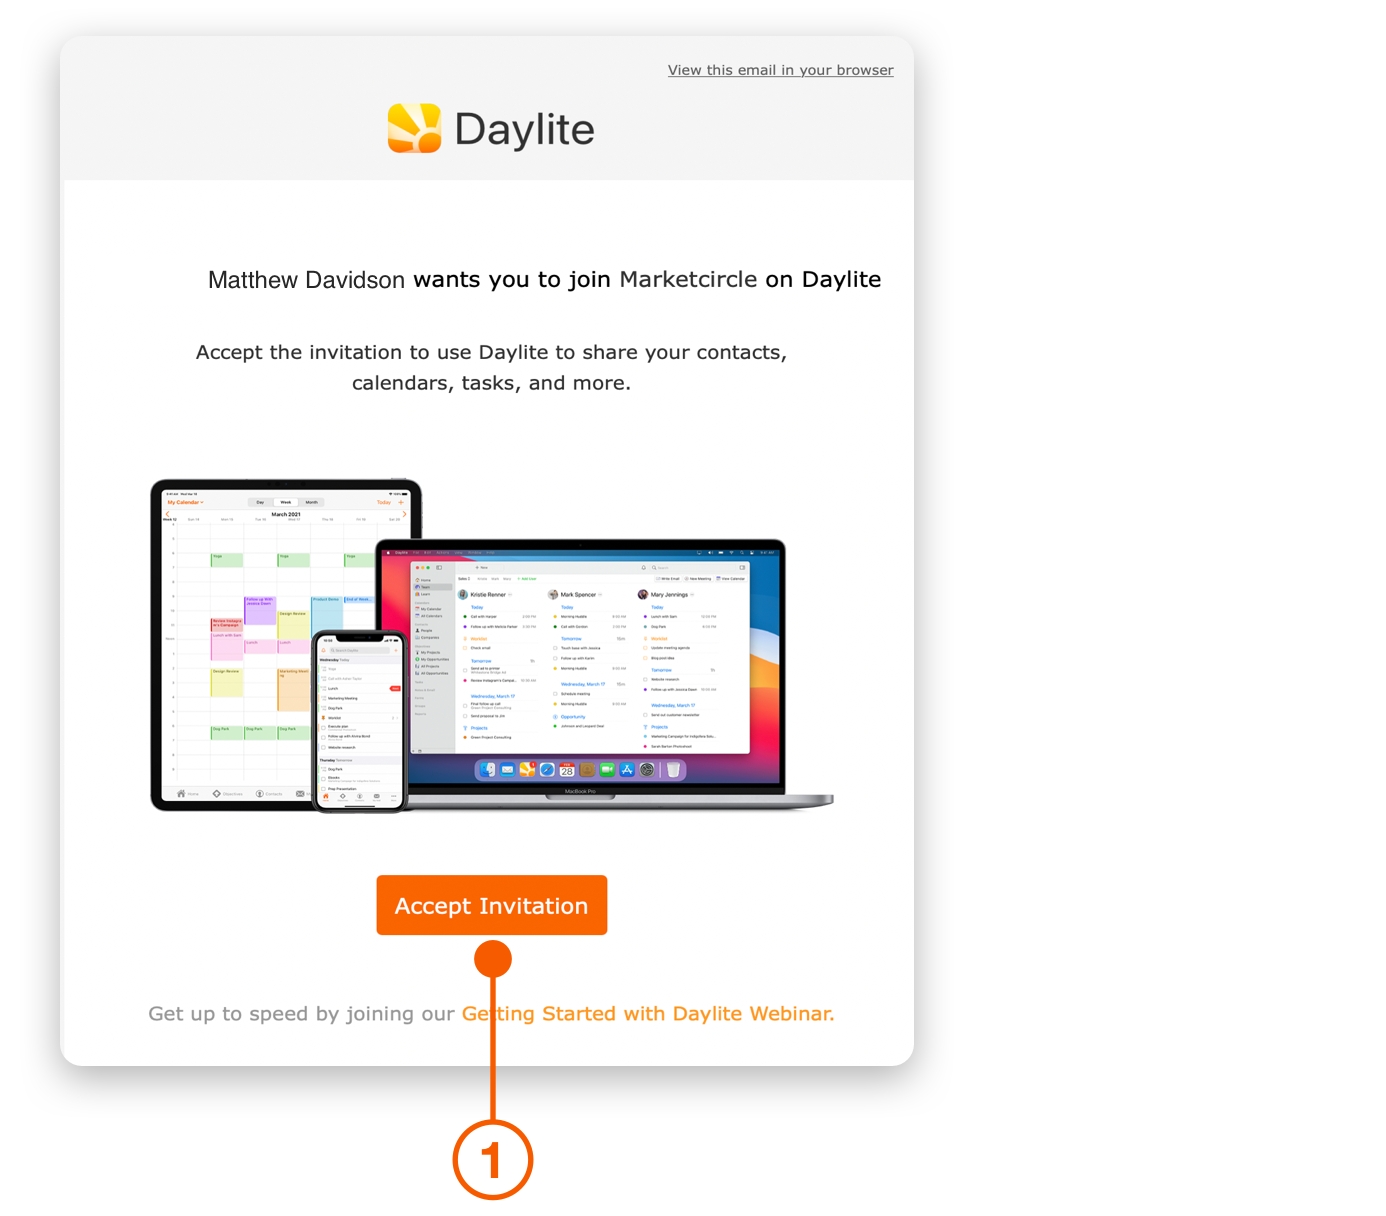 A Daylite Invitation email